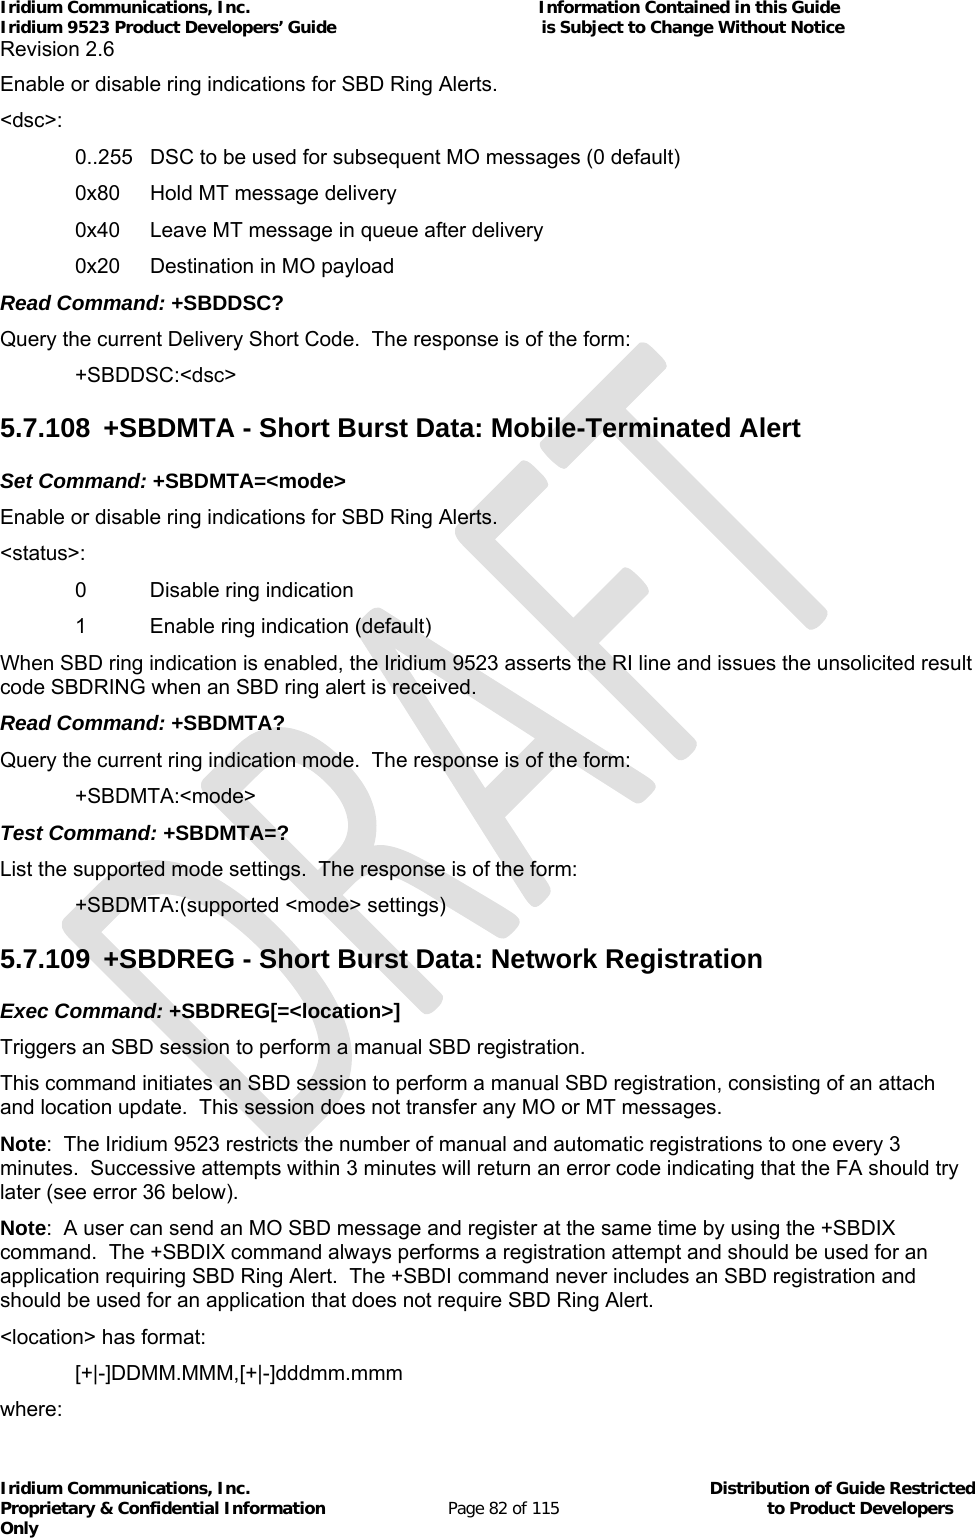 Iridium Communications, Inc.                                                           Information Contained in this Guide  Iridium 9523 Product Developers’ Guide                                          is Subject to Change Without Notice  Revision 2.6 Iridium Communications, Inc.                                          Distribution of Guide Restricted Proprietary &amp; Confidential Information                         Page 82 of 115                                        to Product Developers Only           Enable or disable ring indications for SBD Ring Alerts. &lt;dsc&gt;:    0..255  DSC to be used for subsequent MO messages (0 default)   0x80  Hold MT message delivery   0x40  Leave MT message in queue after delivery   0x20  Destination in MO payload Read Command: +SBDDSC? Query the current Delivery Short Code.  The response is of the form:  +SBDDSC:&lt;dsc&gt; 5.7.108  +SBDMTA - Short Burst Data: Mobile-Terminated Alert Set Command: +SBDMTA=&lt;mode&gt; Enable or disable ring indications for SBD Ring Alerts. &lt;status&gt;:    0  Disable ring indication   1  Enable ring indication (default) When SBD ring indication is enabled, the Iridium 9523 asserts the RI line and issues the unsolicited result code SBDRING when an SBD ring alert is received. Read Command: +SBDMTA? Query the current ring indication mode.  The response is of the form:  +SBDMTA:&lt;mode&gt; Test Command: +SBDMTA=? List the supported mode settings.  The response is of the form:   +SBDMTA:(supported &lt;mode&gt; settings) 5.7.109  +SBDREG - Short Burst Data: Network Registration Exec Command: +SBDREG[=&lt;location&gt;] Triggers an SBD session to perform a manual SBD registration. This command initiates an SBD session to perform a manual SBD registration, consisting of an attach and location update.  This session does not transfer any MO or MT messages. Note:  The Iridium 9523 restricts the number of manual and automatic registrations to one every 3 minutes.  Successive attempts within 3 minutes will return an error code indicating that the FA should try later (see error 36 below). Note:  A user can send an MO SBD message and register at the same time by using the +SBDIX command.  The +SBDIX command always performs a registration attempt and should be used for an application requiring SBD Ring Alert.  The +SBDI command never includes an SBD registration and should be used for an application that does not require SBD Ring Alert. &lt;location&gt; has format:  [+|-]DDMM.MMM,[+|-]dddmm.mmm where: 